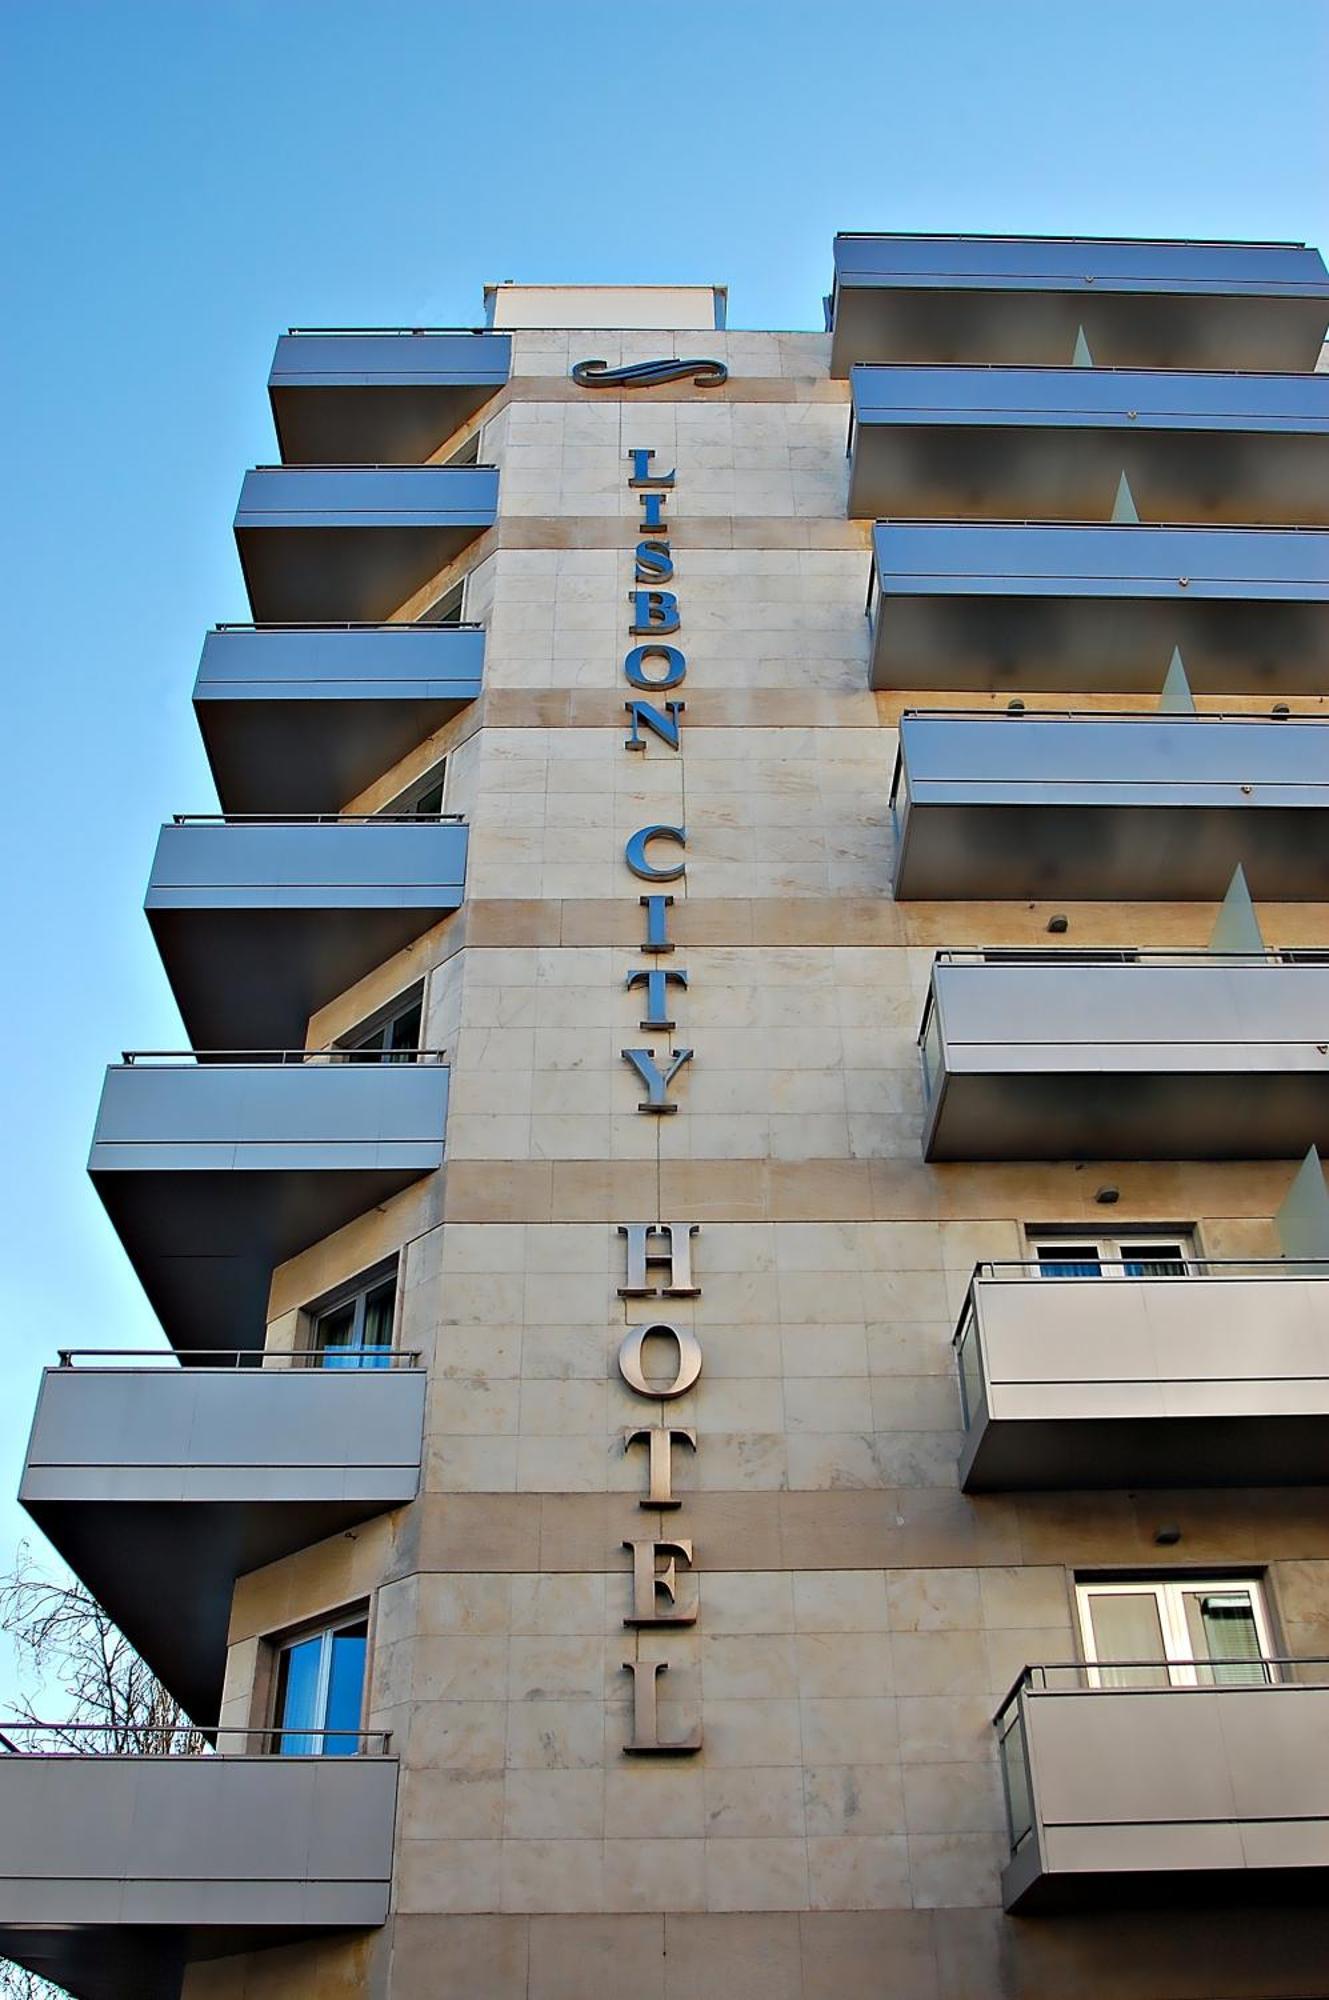 Lisbon City Hotel By City Hotels Exterior foto